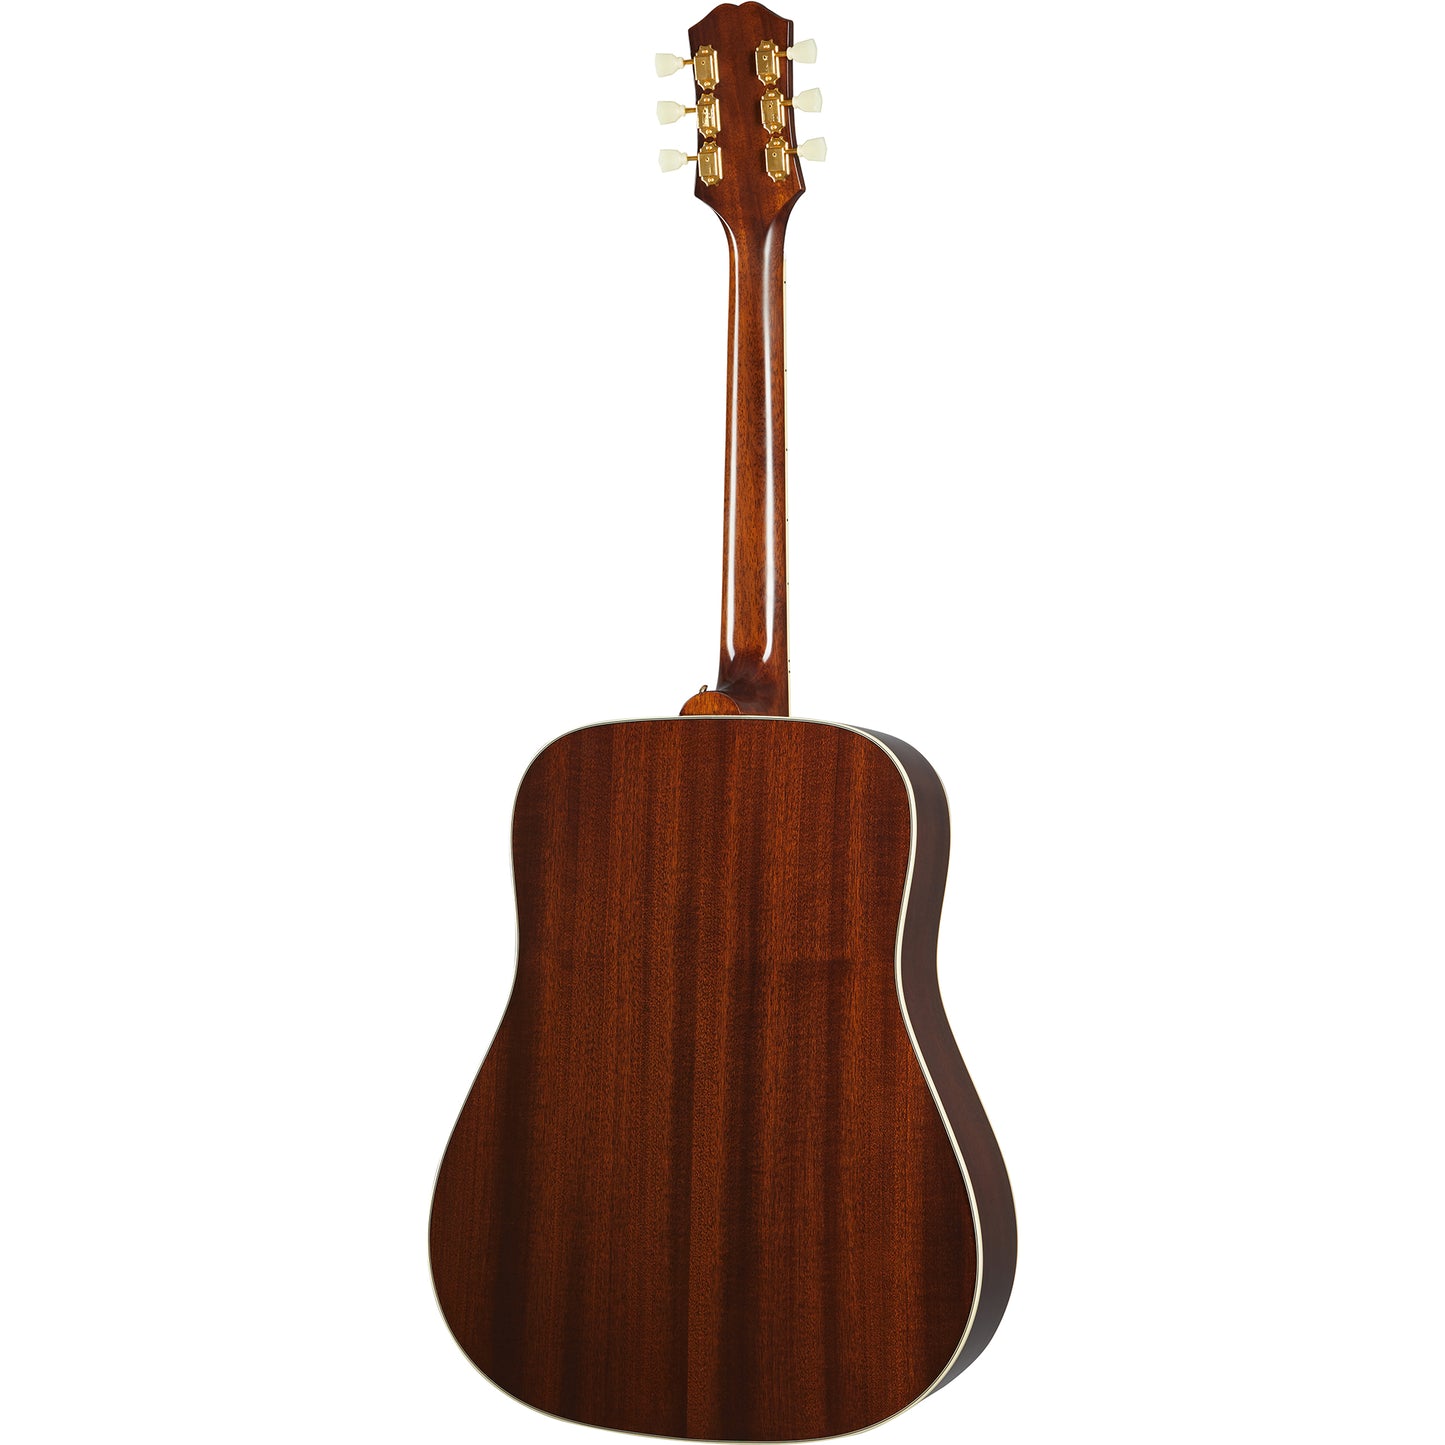 Epiphone Inspired By Gibson Hummingbird Acoustic Guitar in Aged Natural